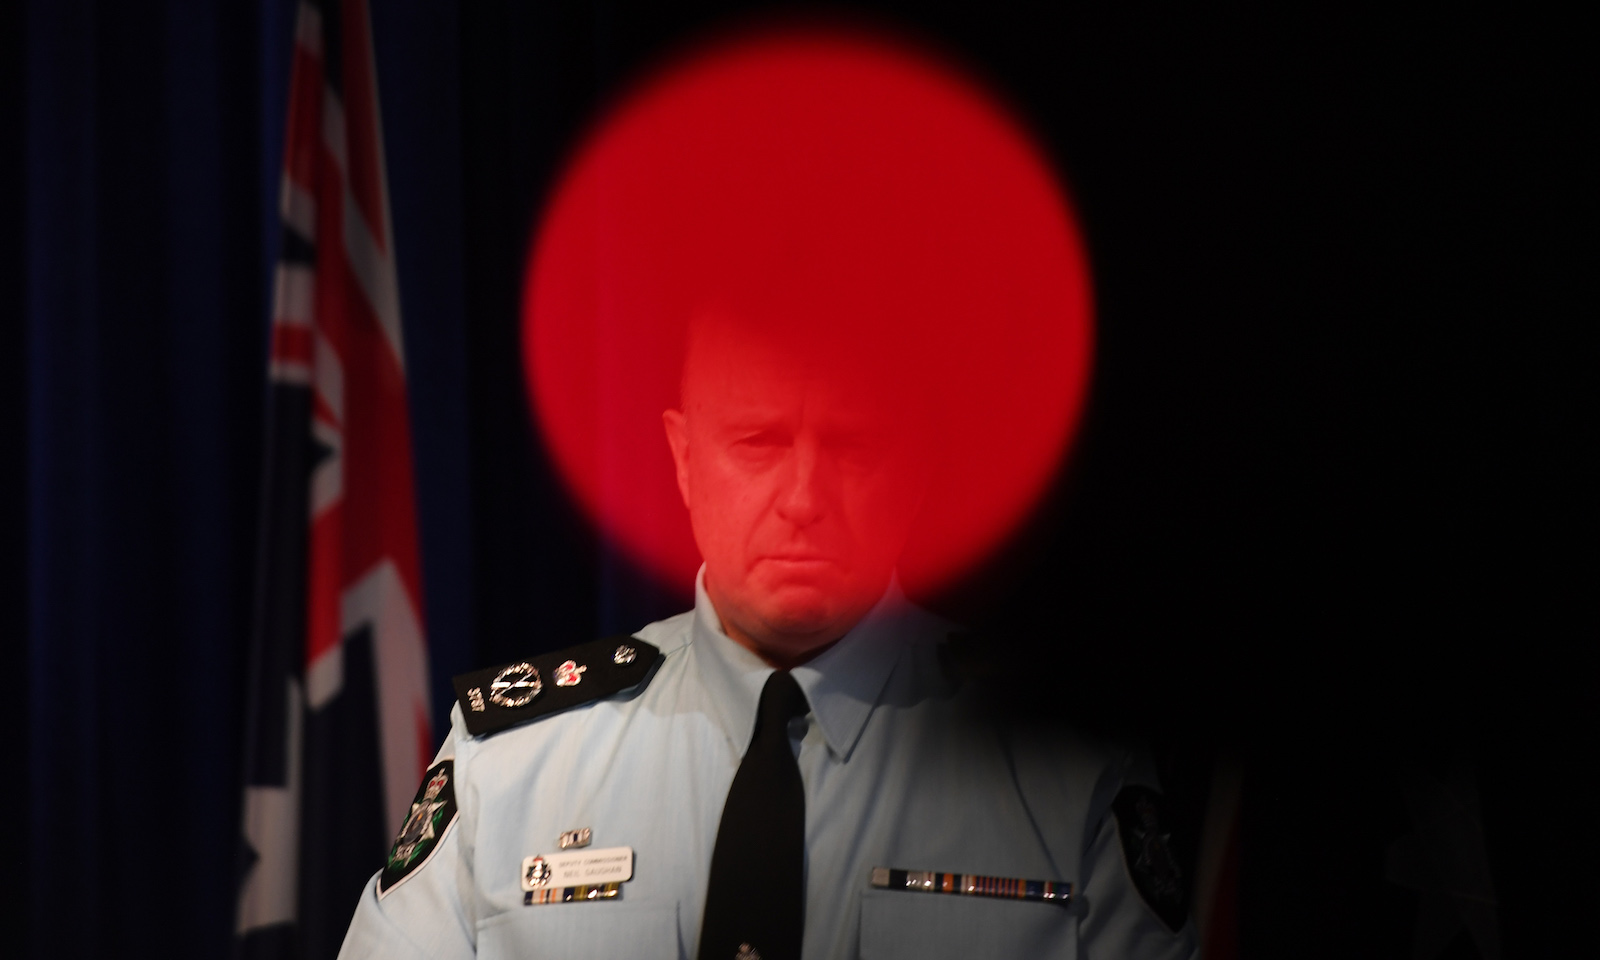 Acting AFP Commissioner Neil Gaughan speaks to the media after officers raided a journalist’s home, Canberra, June 2019 (Photo: Getty Images)